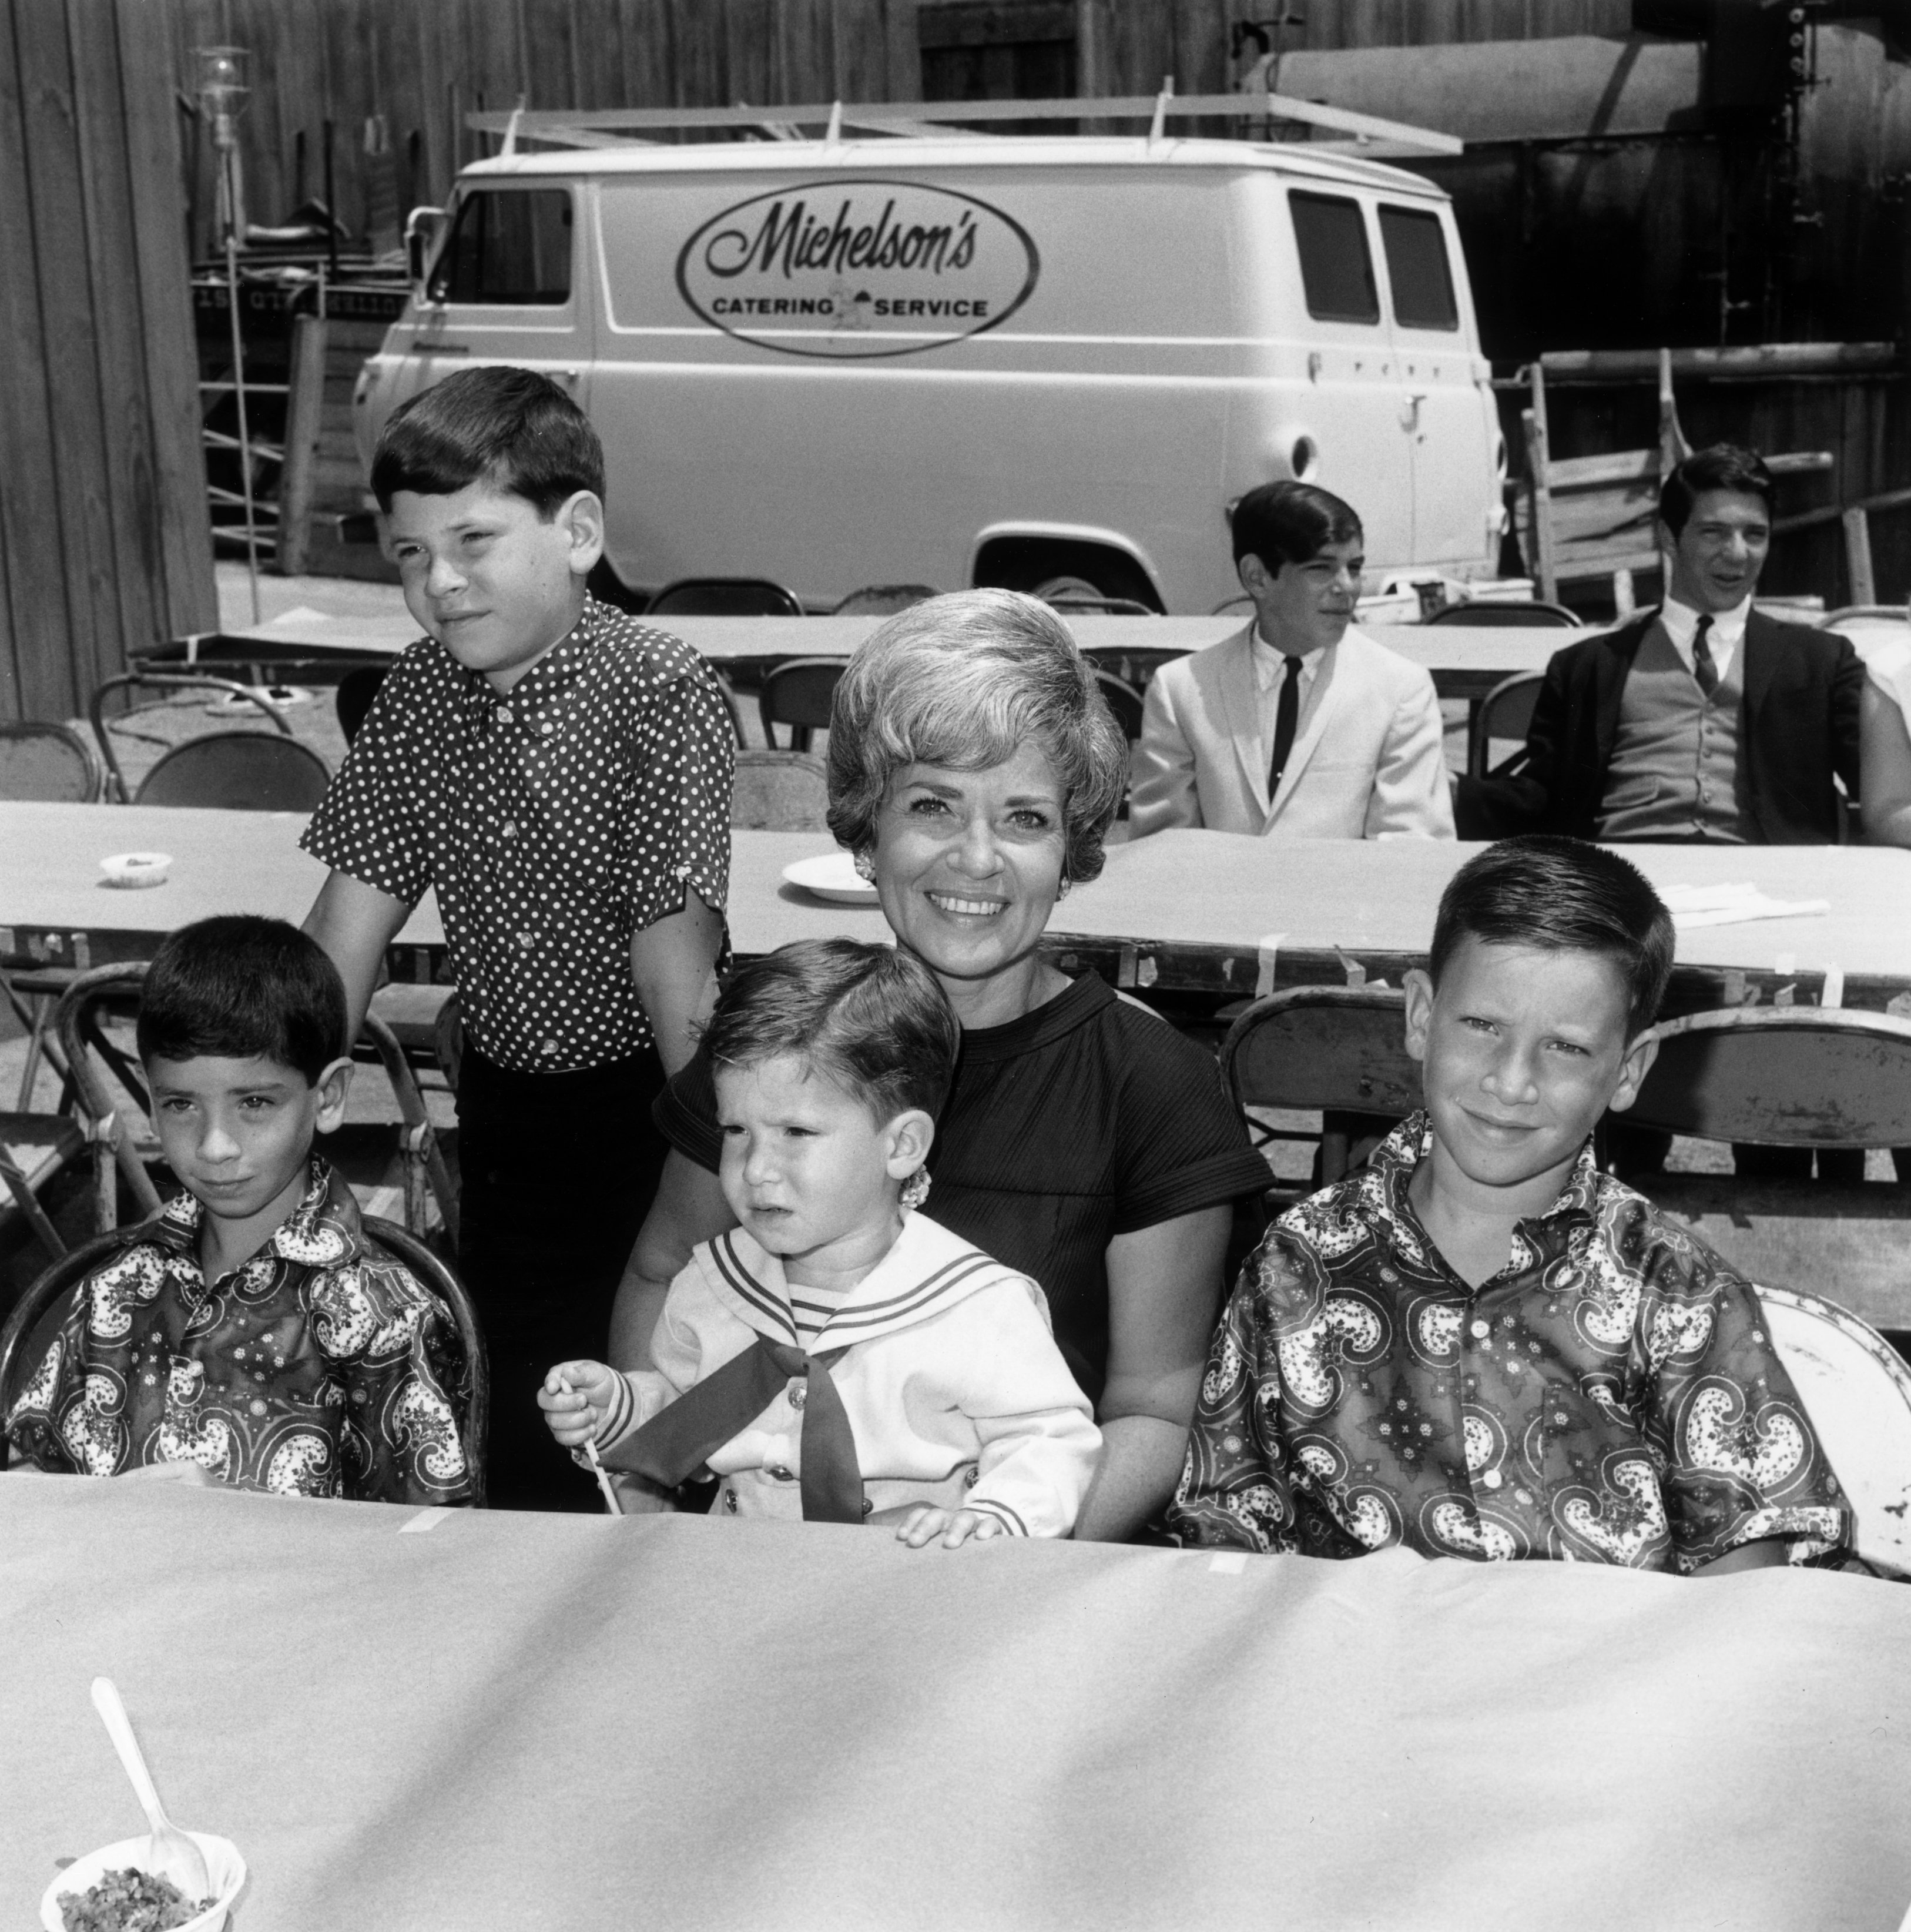 Singer Patti Palmer pictured with her children (left to right) Anthony, Chris, Joseph, and Scott at a children's party, a 'Batman' luncheon for an orphanage in August 1966 in California. / Source: Getty Images